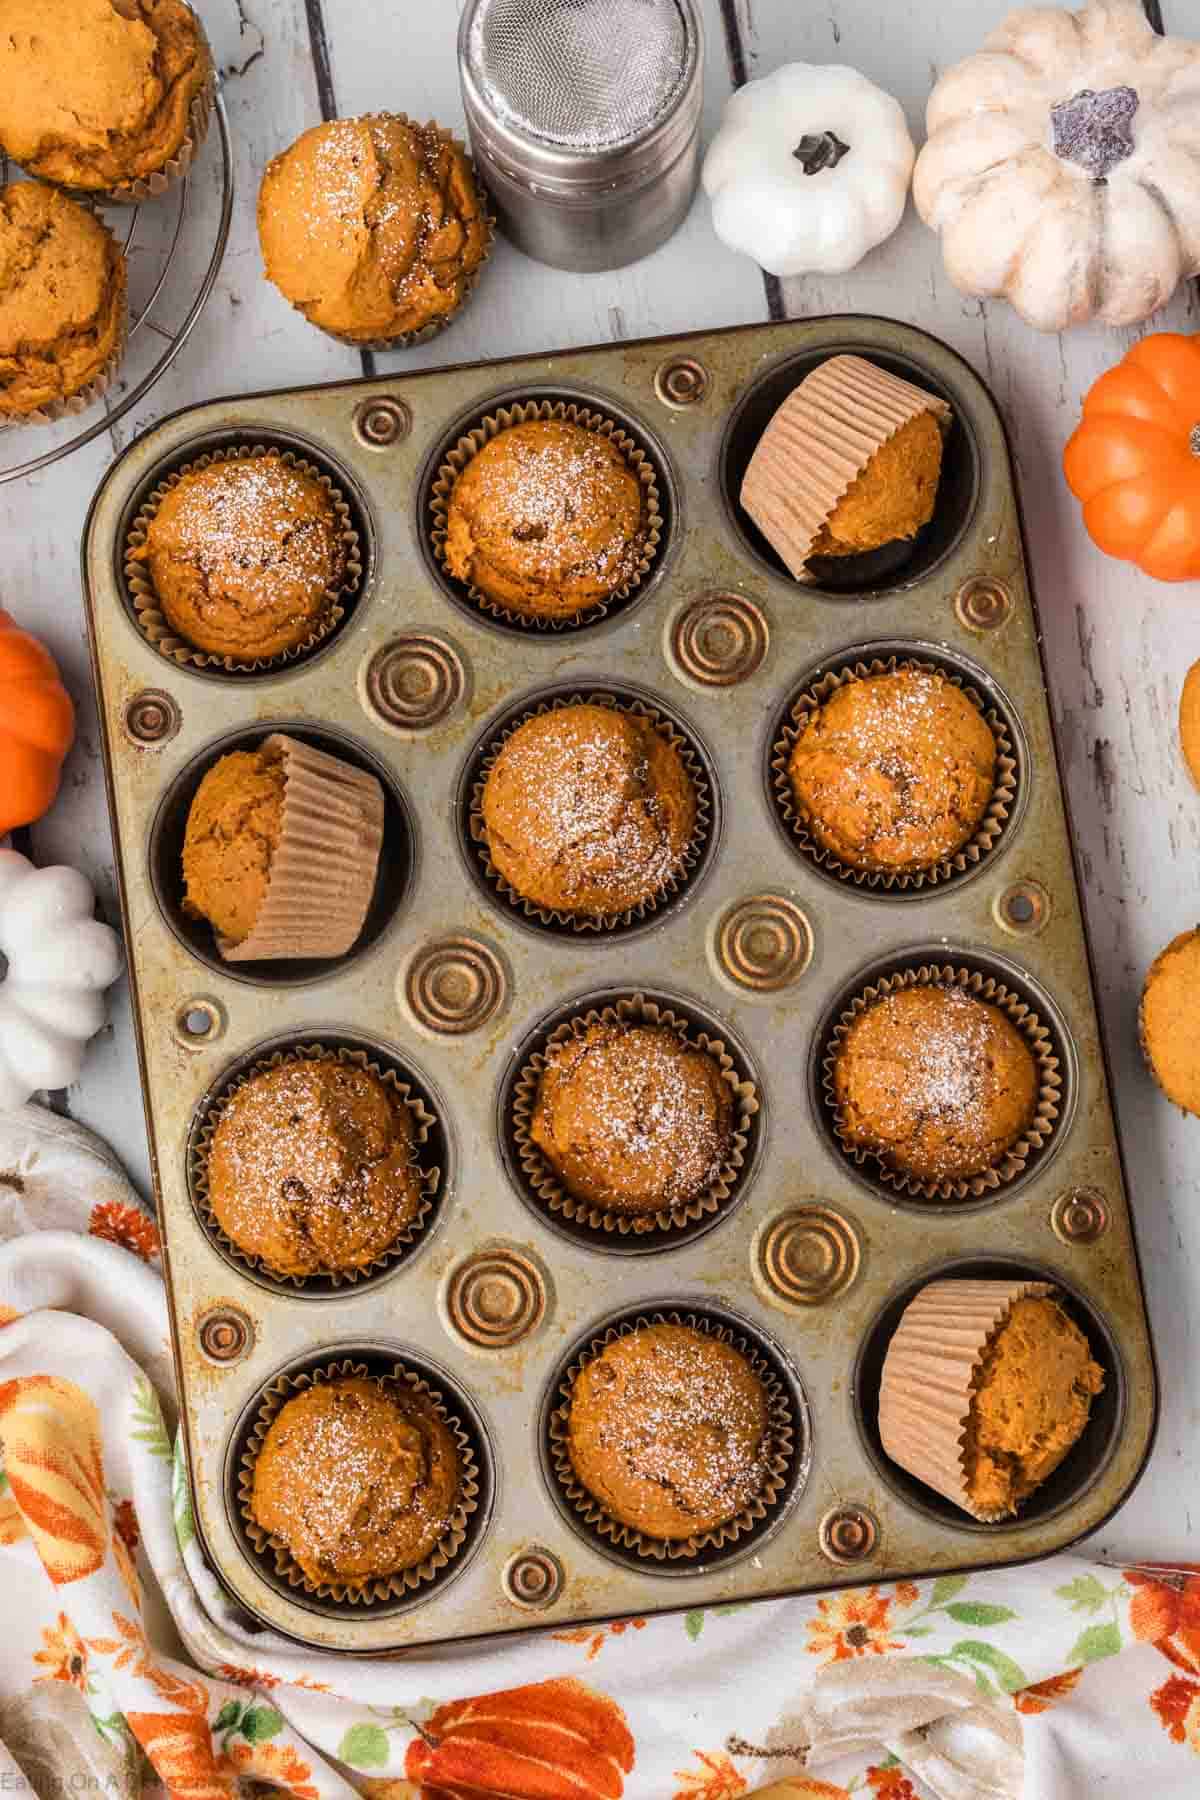 A muffin tray filled with 2 ingredient pumpkin muffins sits on a white wooden table. Some muffins are in paper liners, and others are without. The muffins are topped with powdered sugar. Small decorative pumpkins surround the tray, and a floral cloth is partly visible.